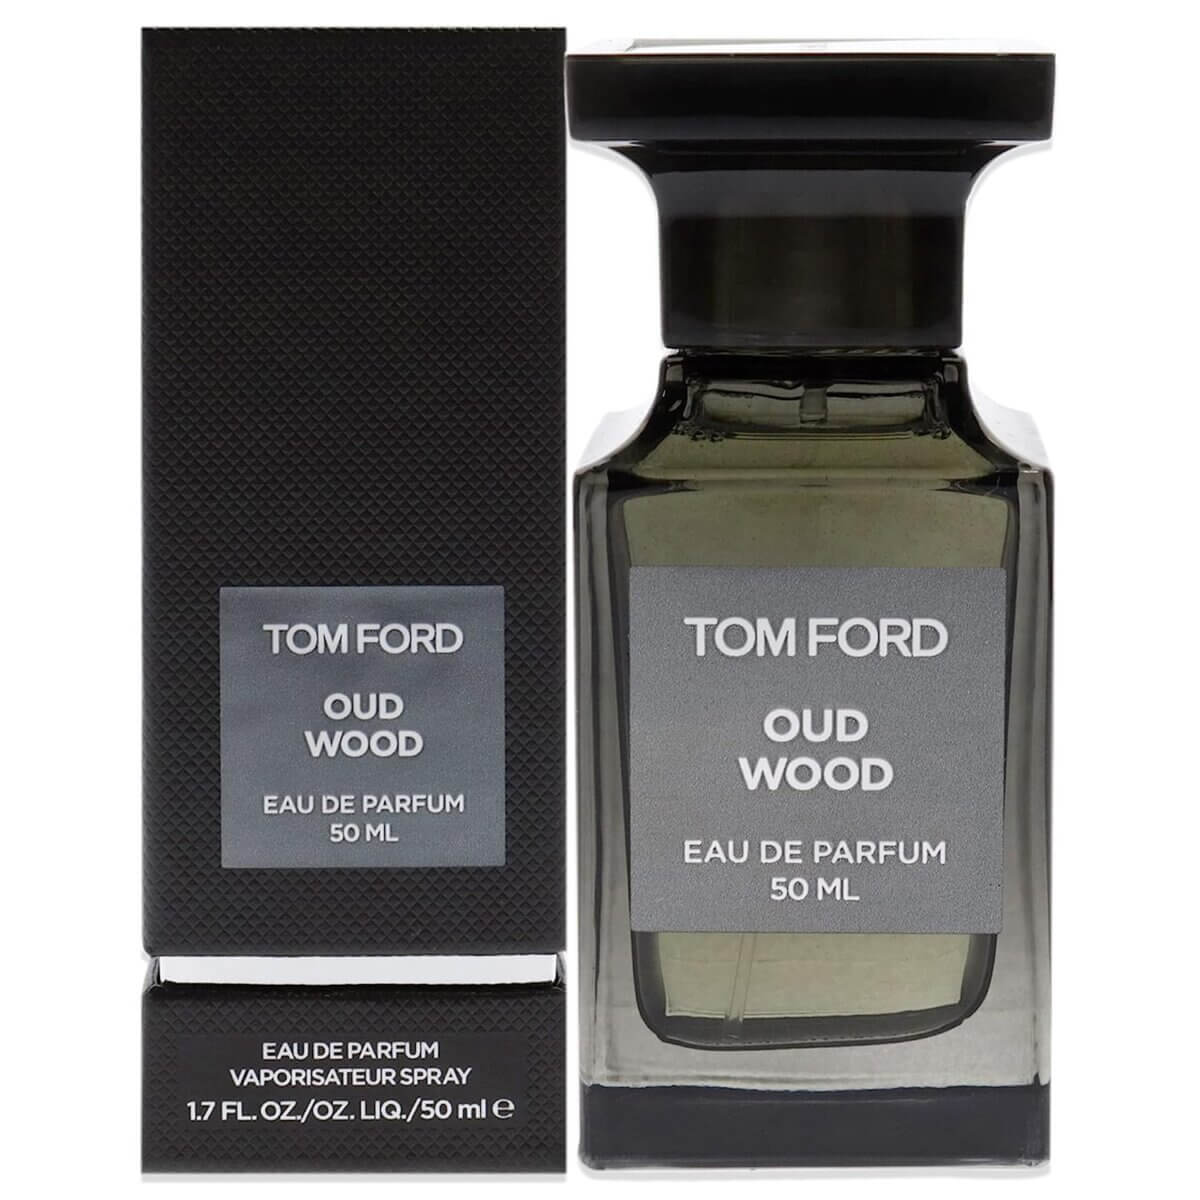 Best Designer Cologne: Top 7 Fragrances Most Recommended By Experts